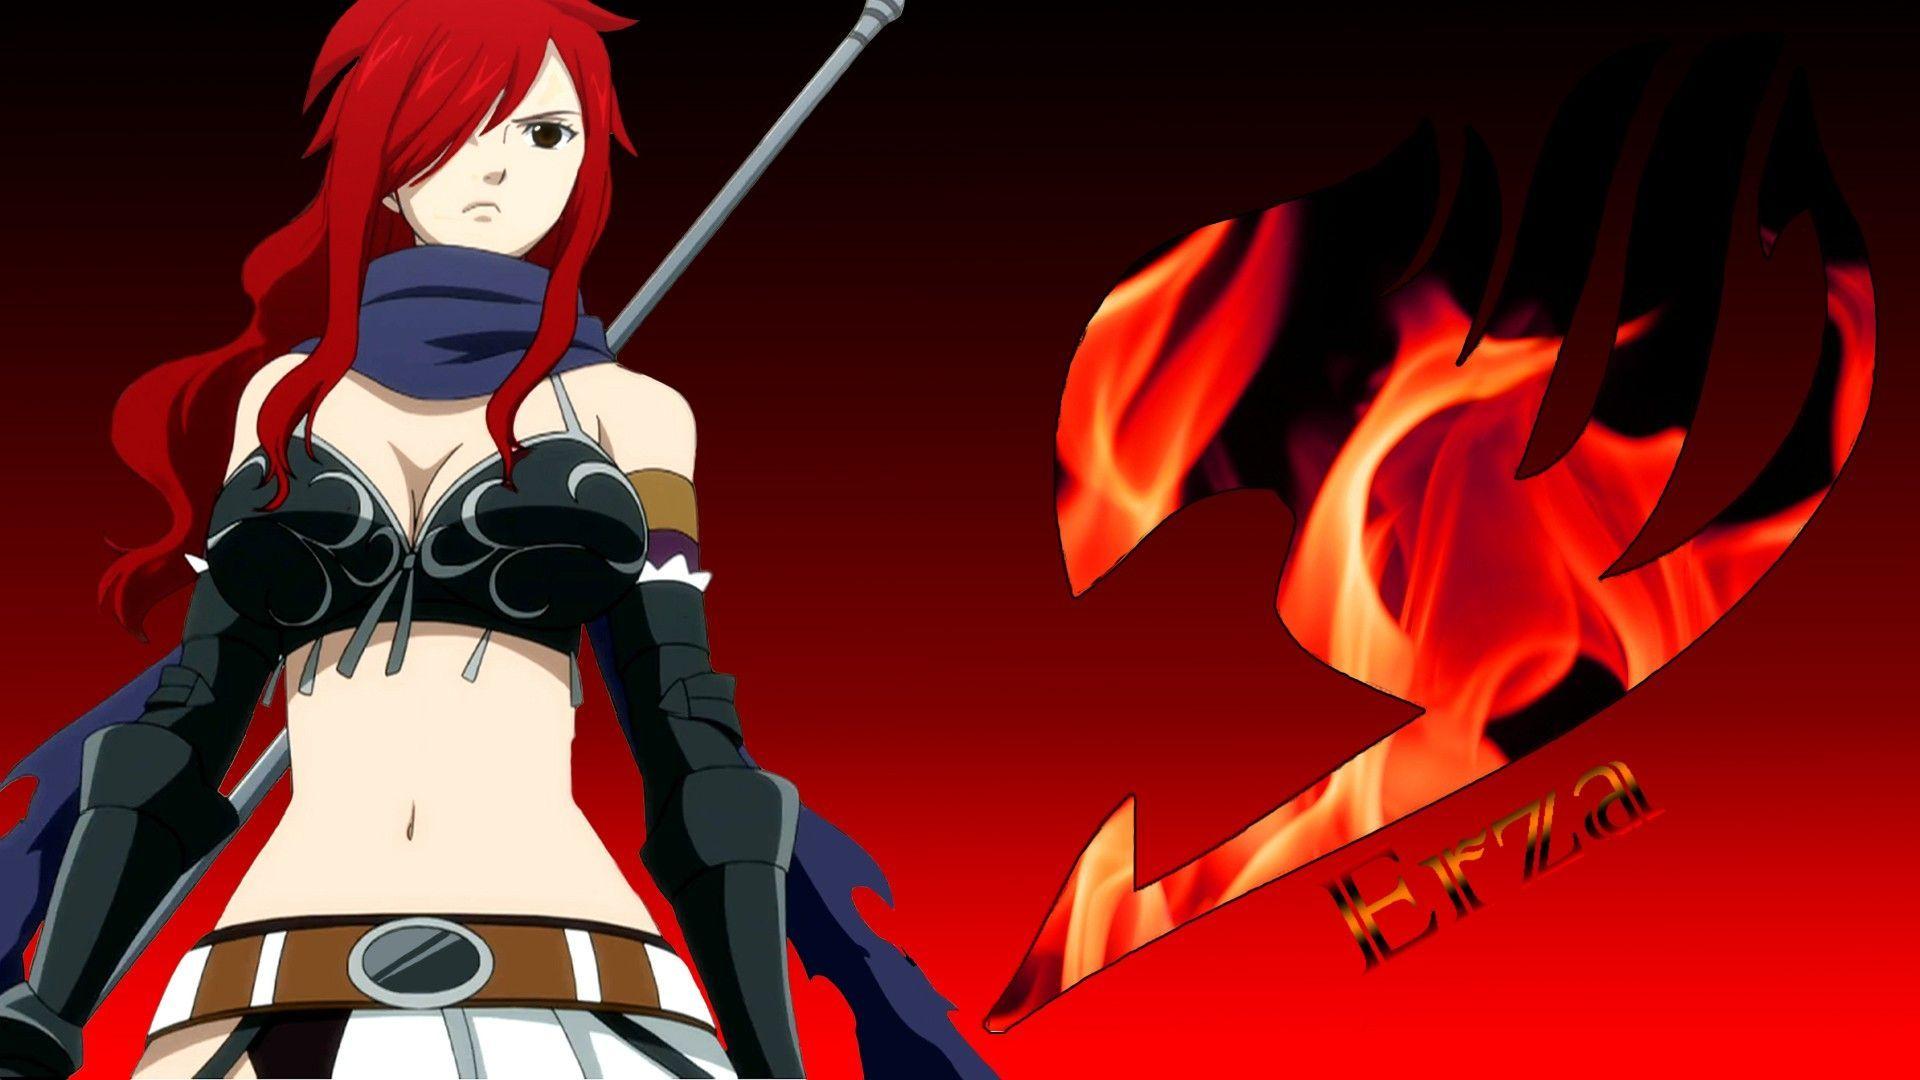 Erza Fairy Tail Background HD Wallpaper. Tattoos maybe